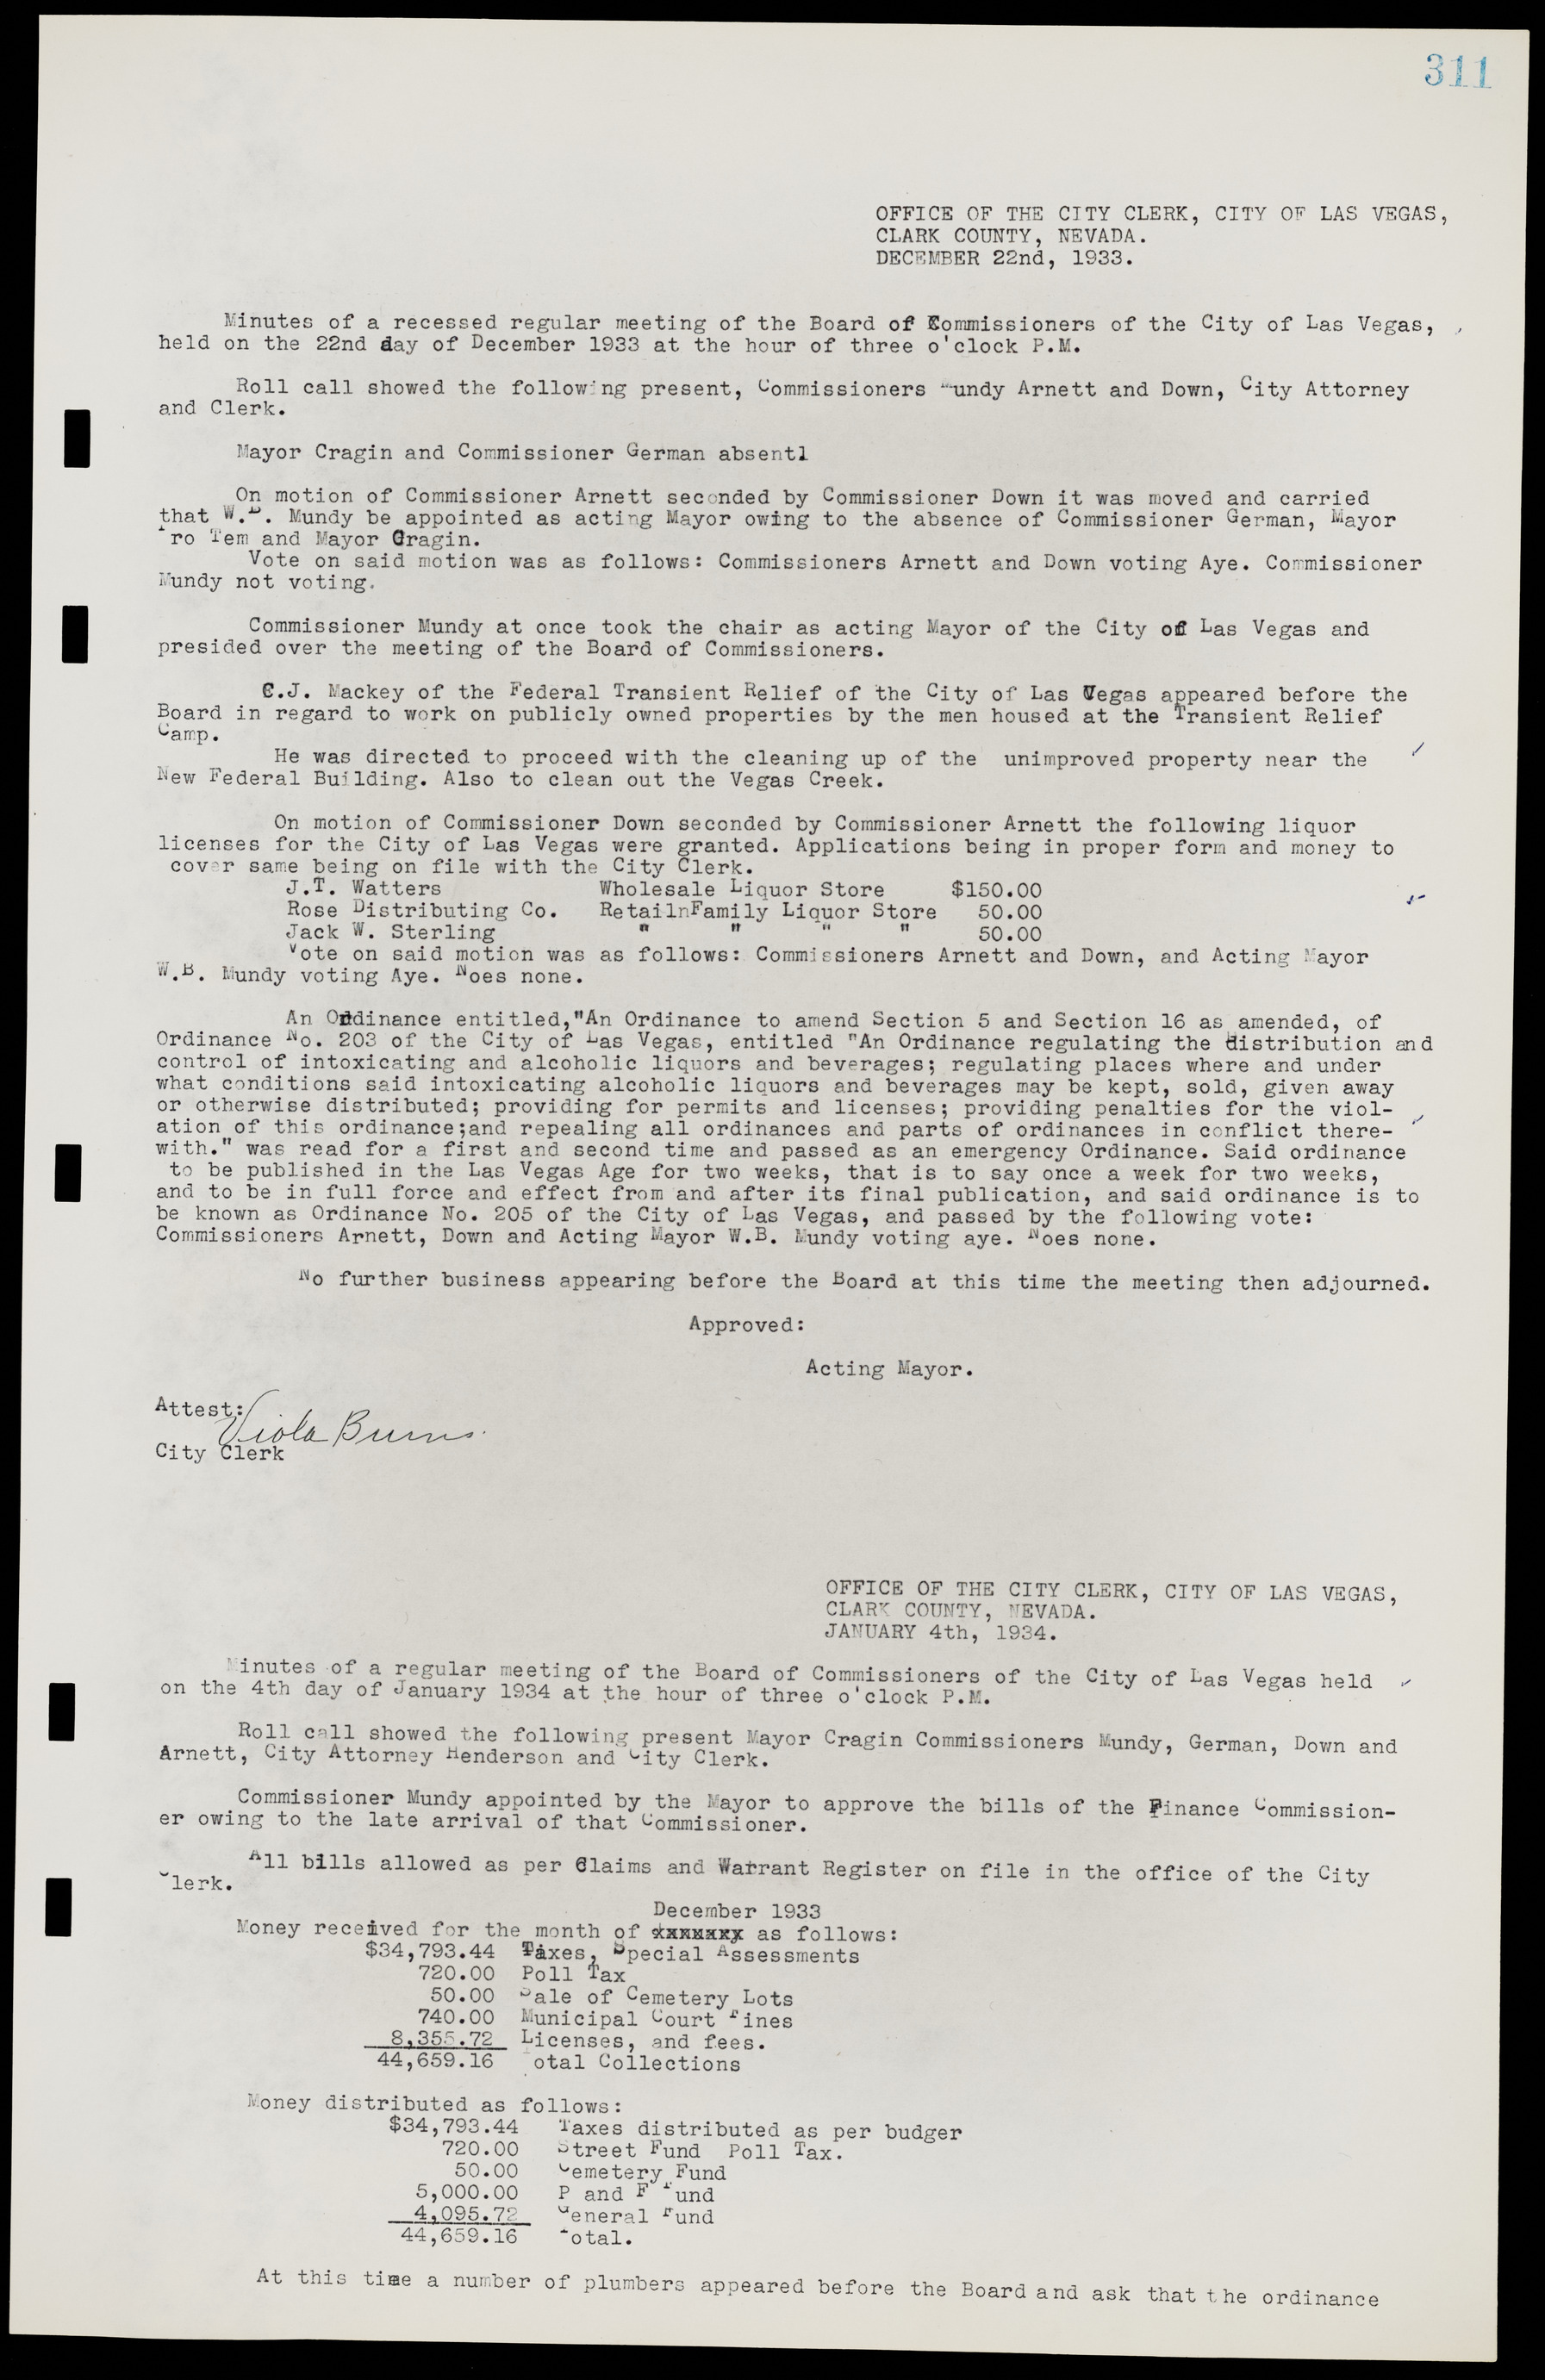 Las Vegas City Commission Minutes, May 14, 1929 to February 11, 1937, lvc000003-318